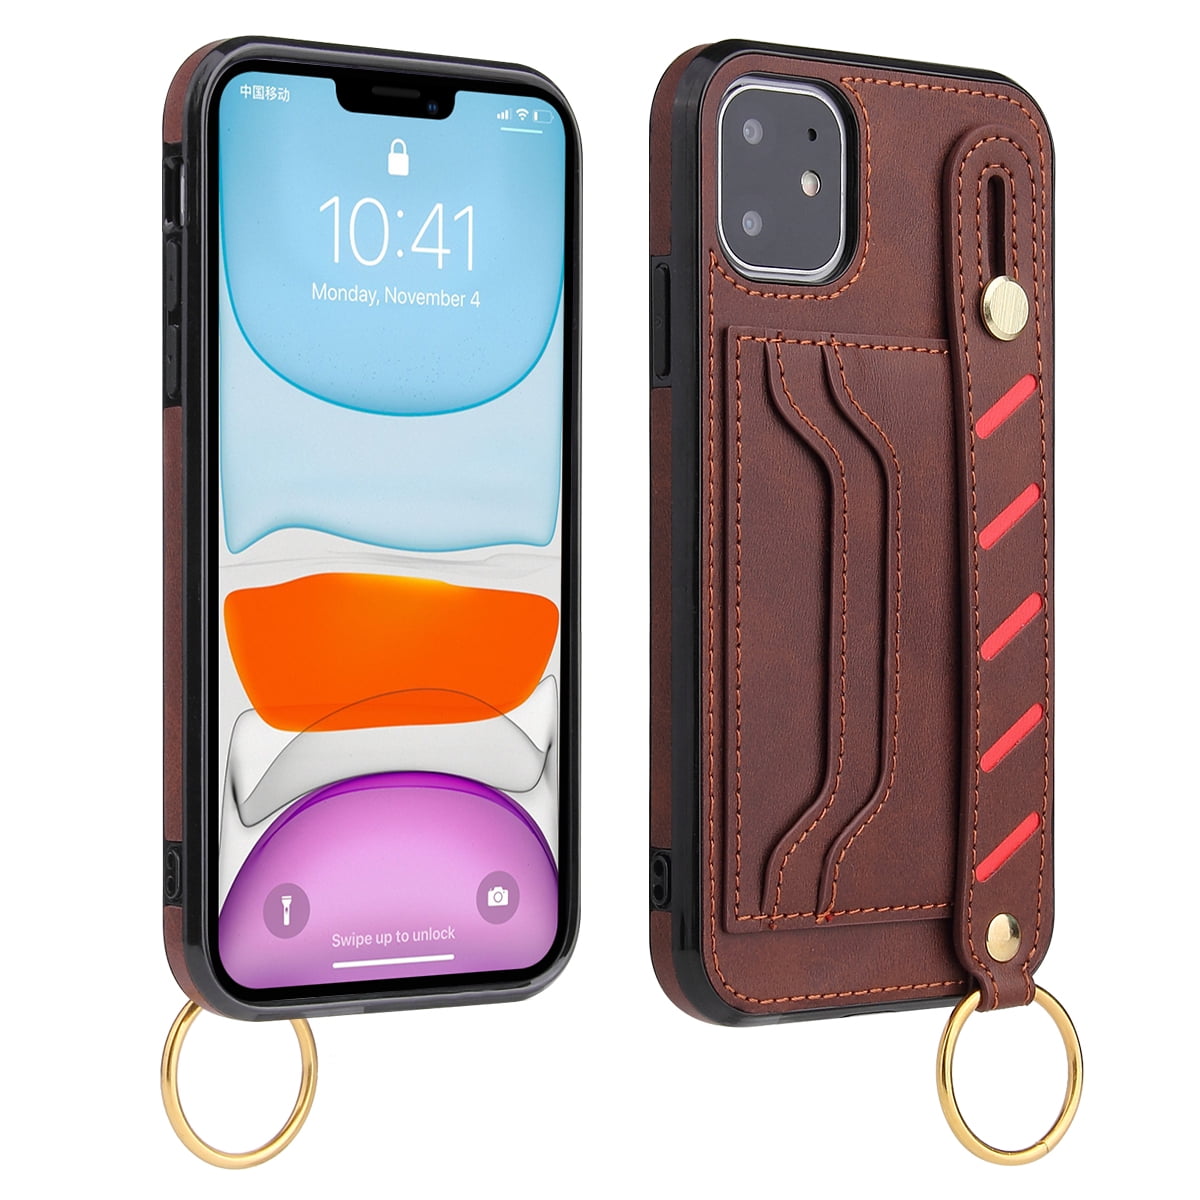 HR Wireless for Apple iPhone 14 6.1 Multi-functional Cards Slot Wrist Strap Vegan Leather Case Cover - Brown